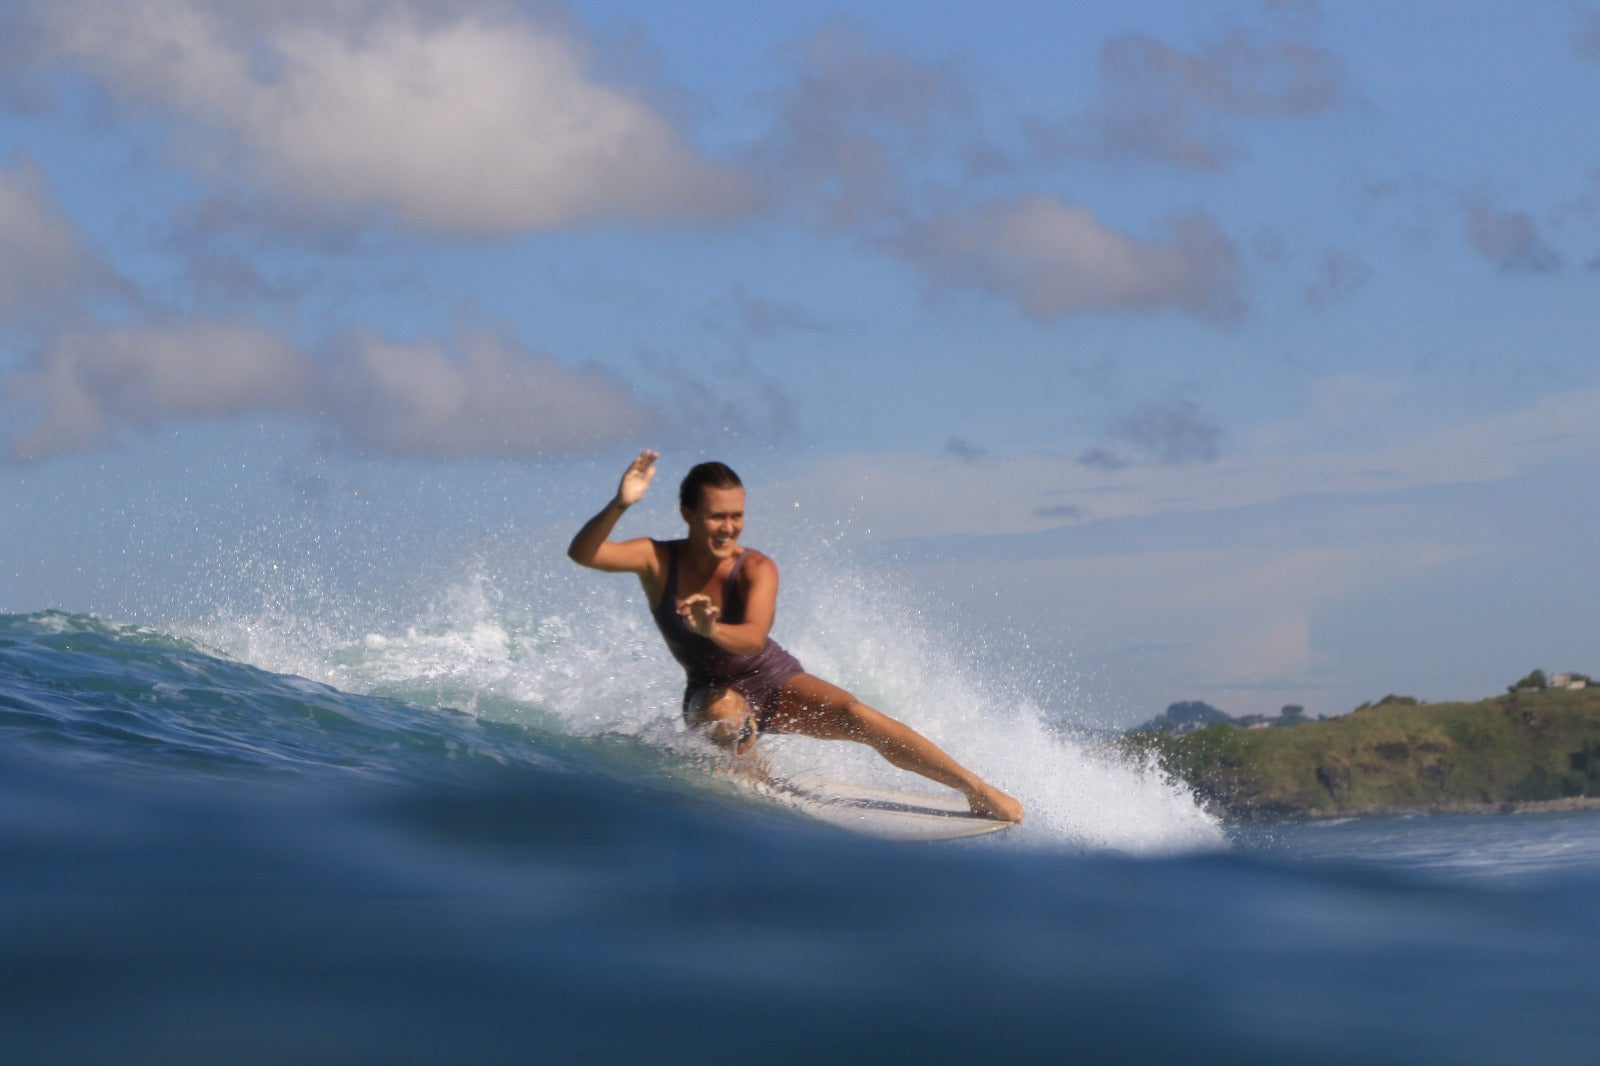 Surf swimwear guide - A roadmap to your style 